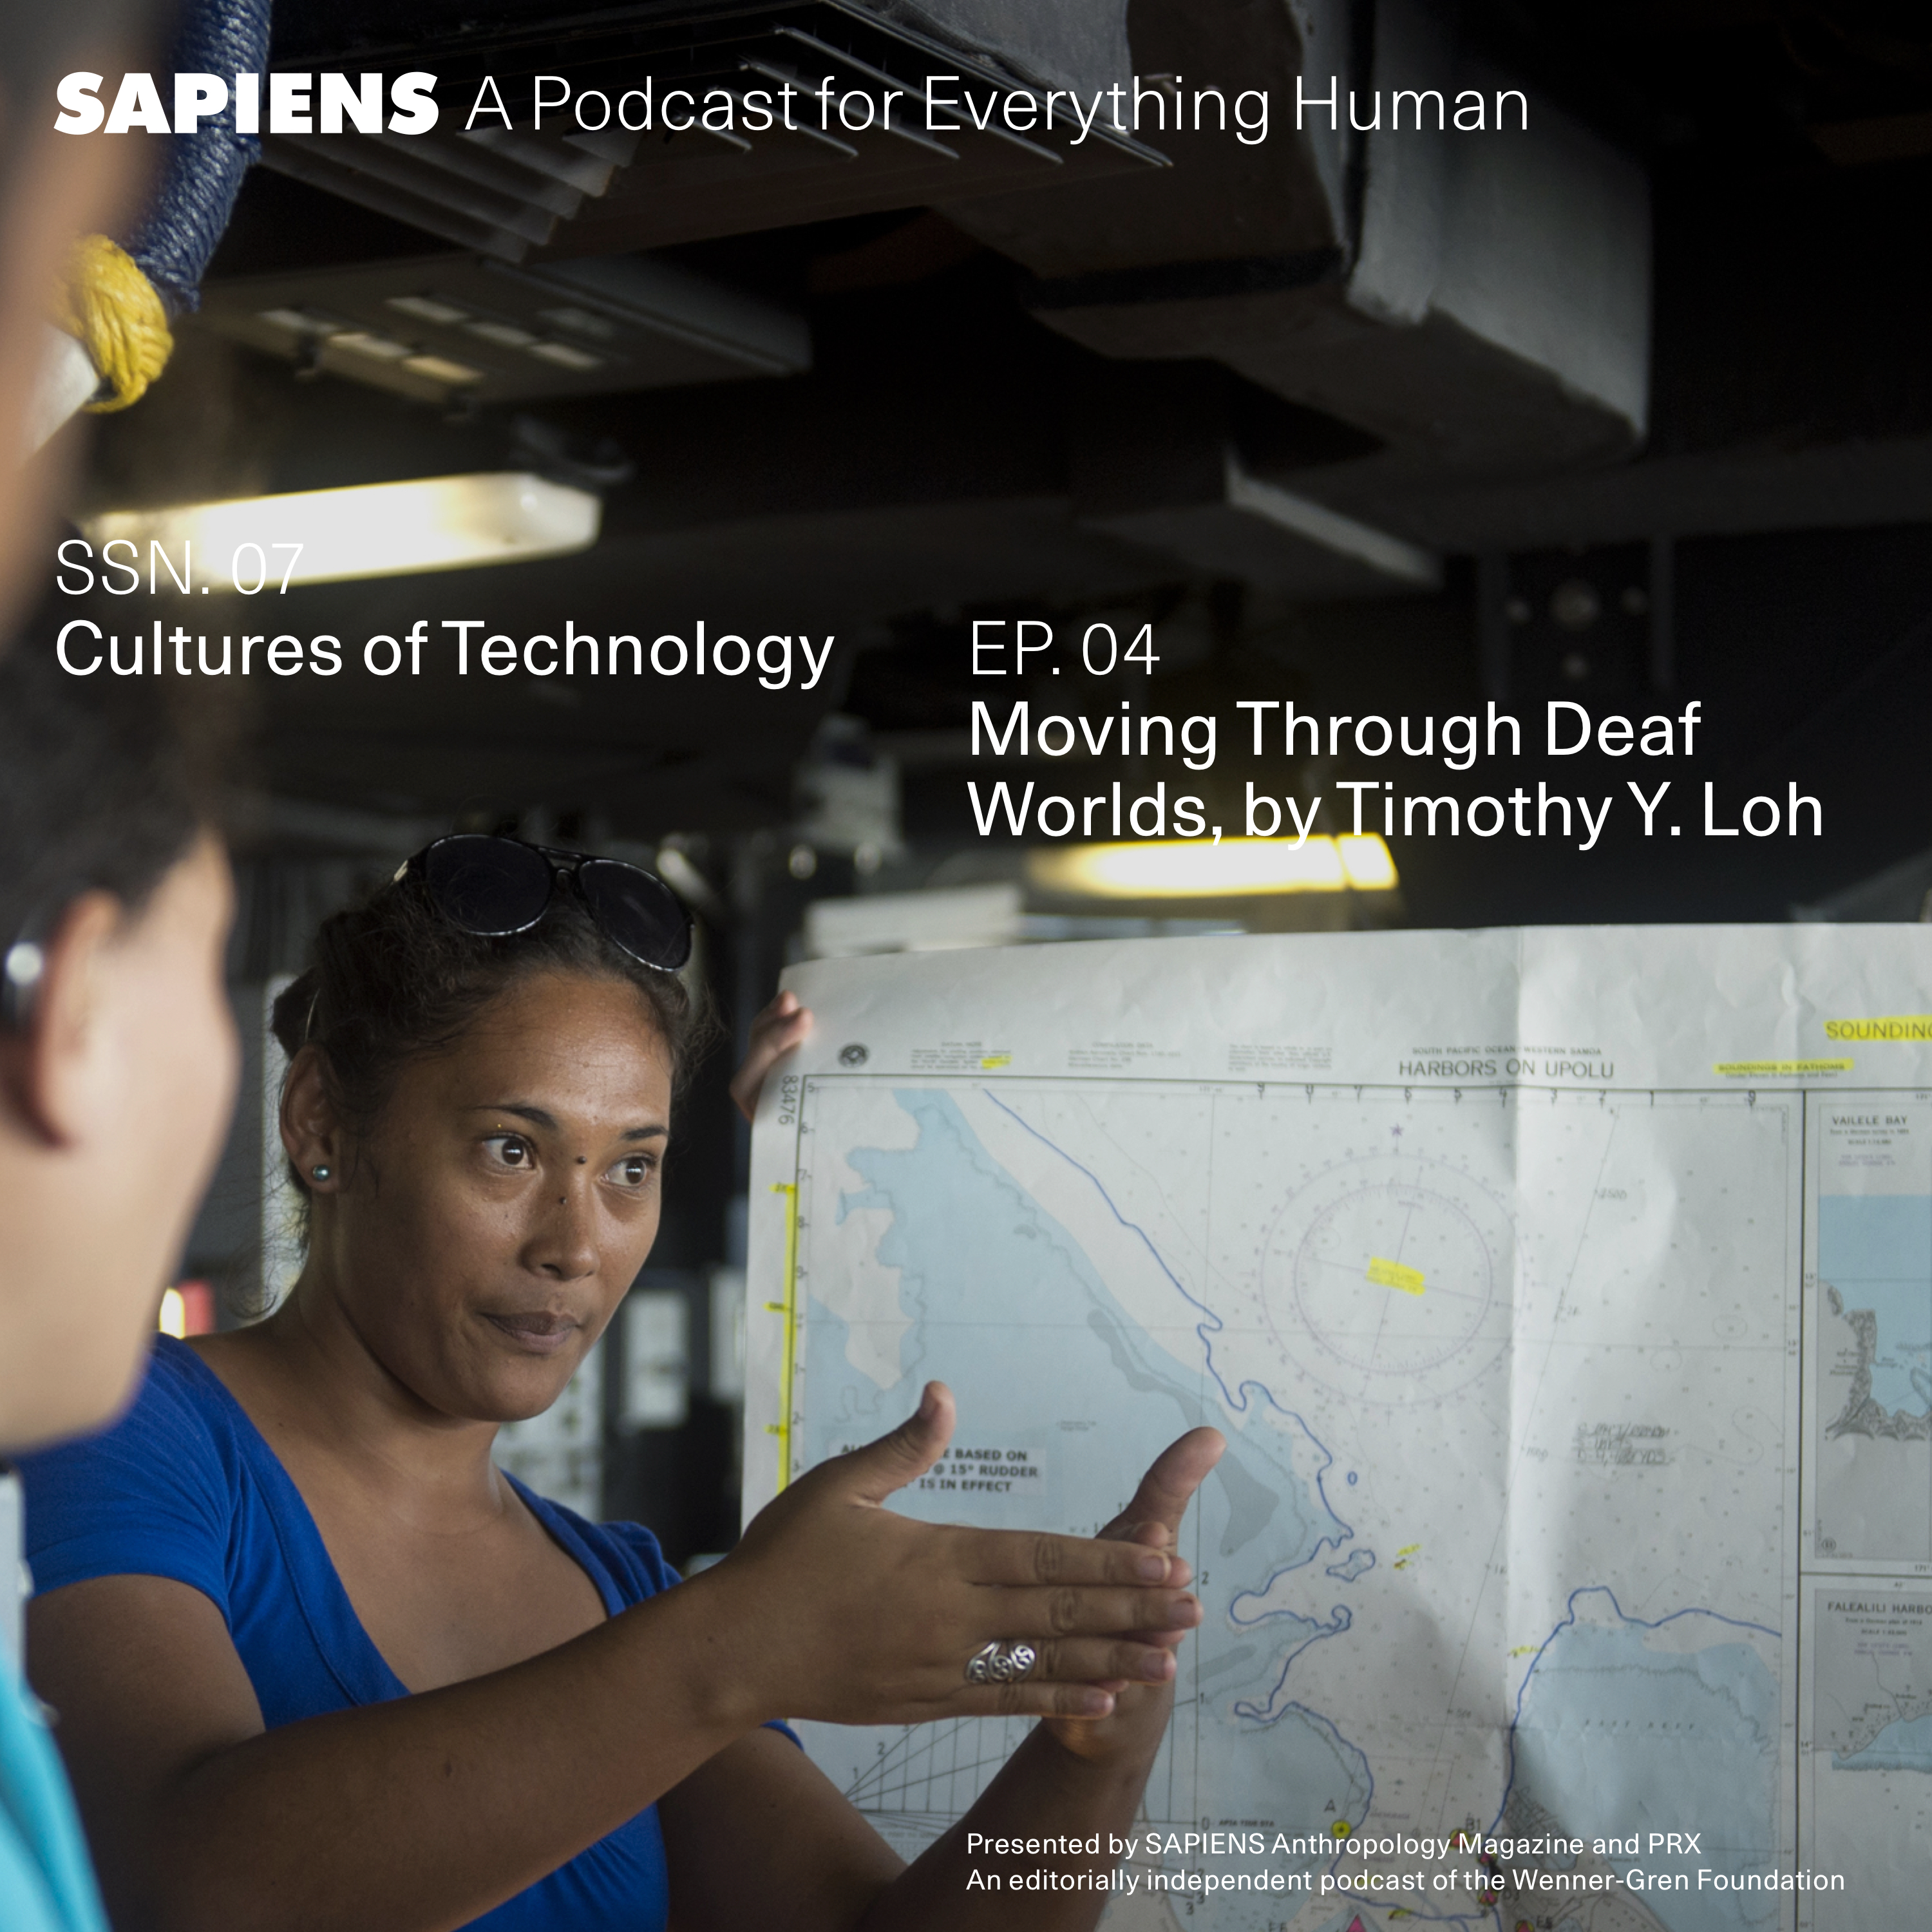 Just Posted: Timothy Loh’s Podcast Episode with SAPIENS Magazine, “Moving Through Deaf Worlds”